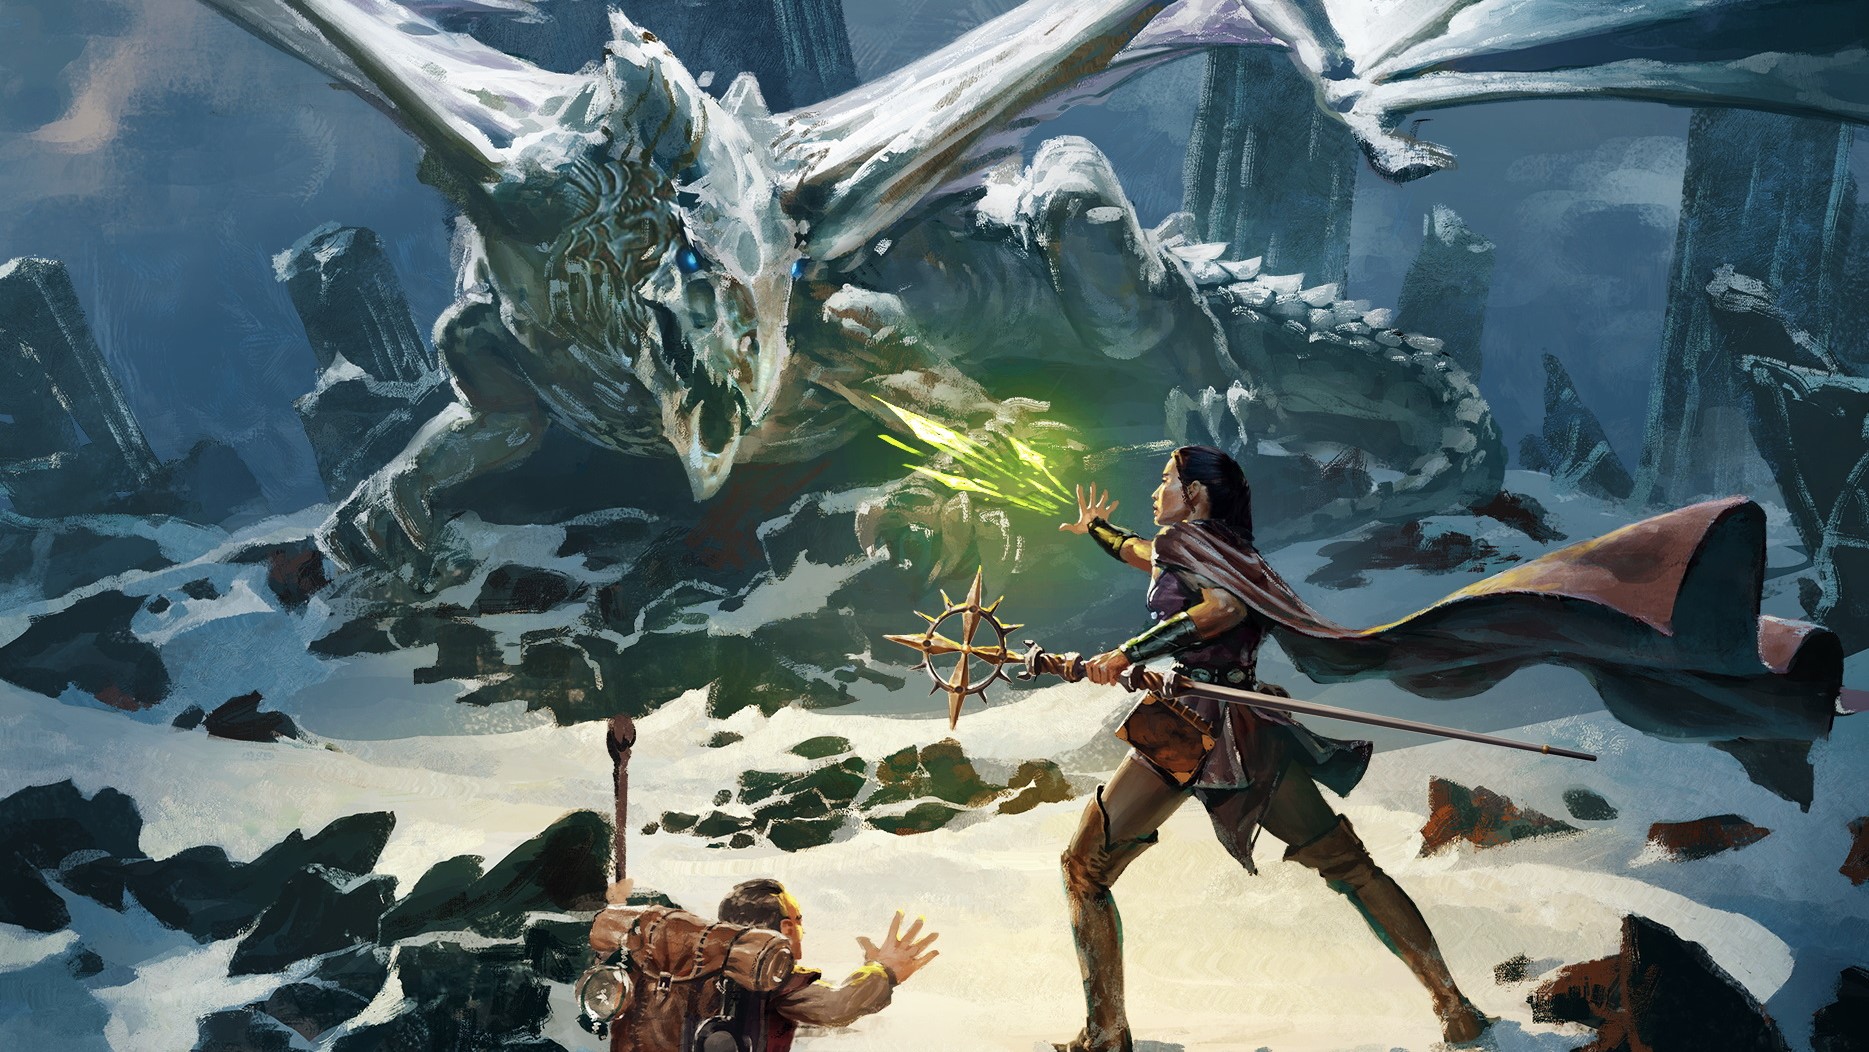 Art of Dungeons & Dragons adventurers fighting a dragon.